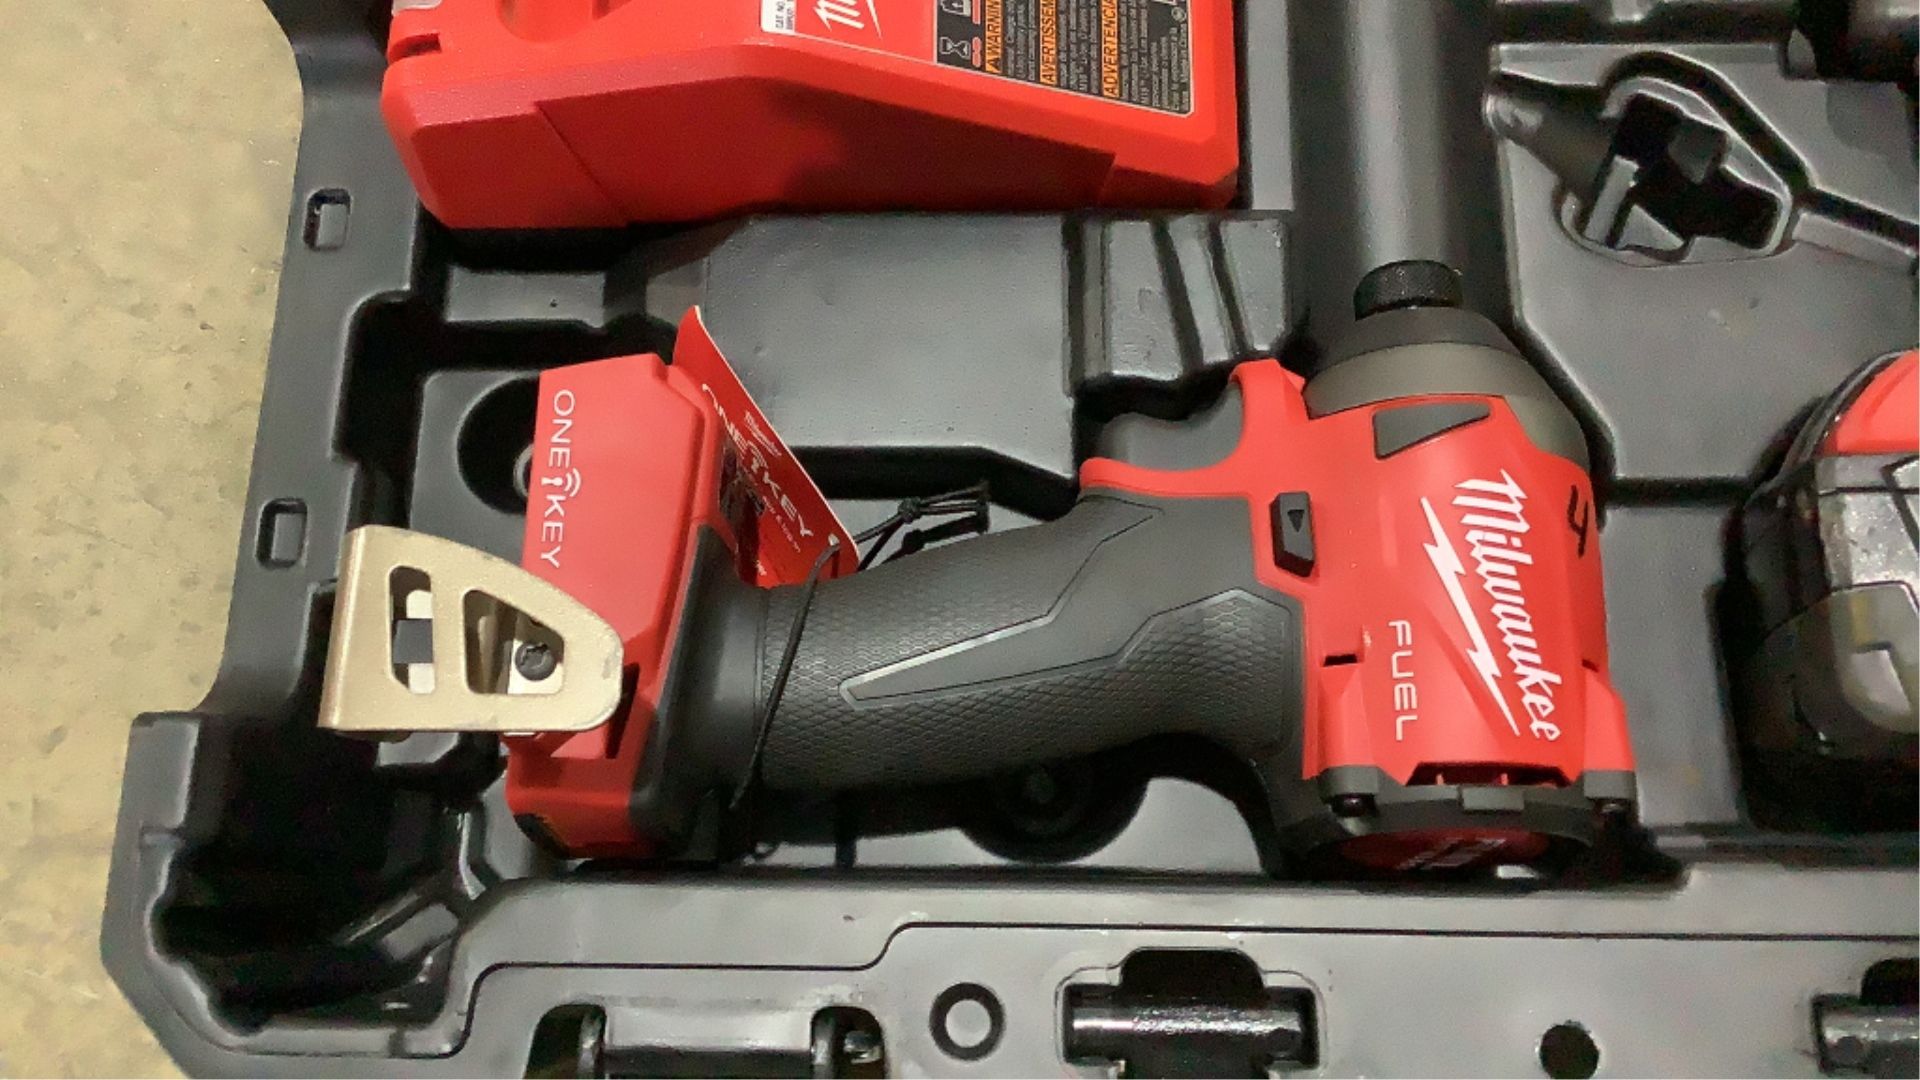 Milwaukee 1/4" Impact Driver and 1/2" Drill/Driver - Image 4 of 12